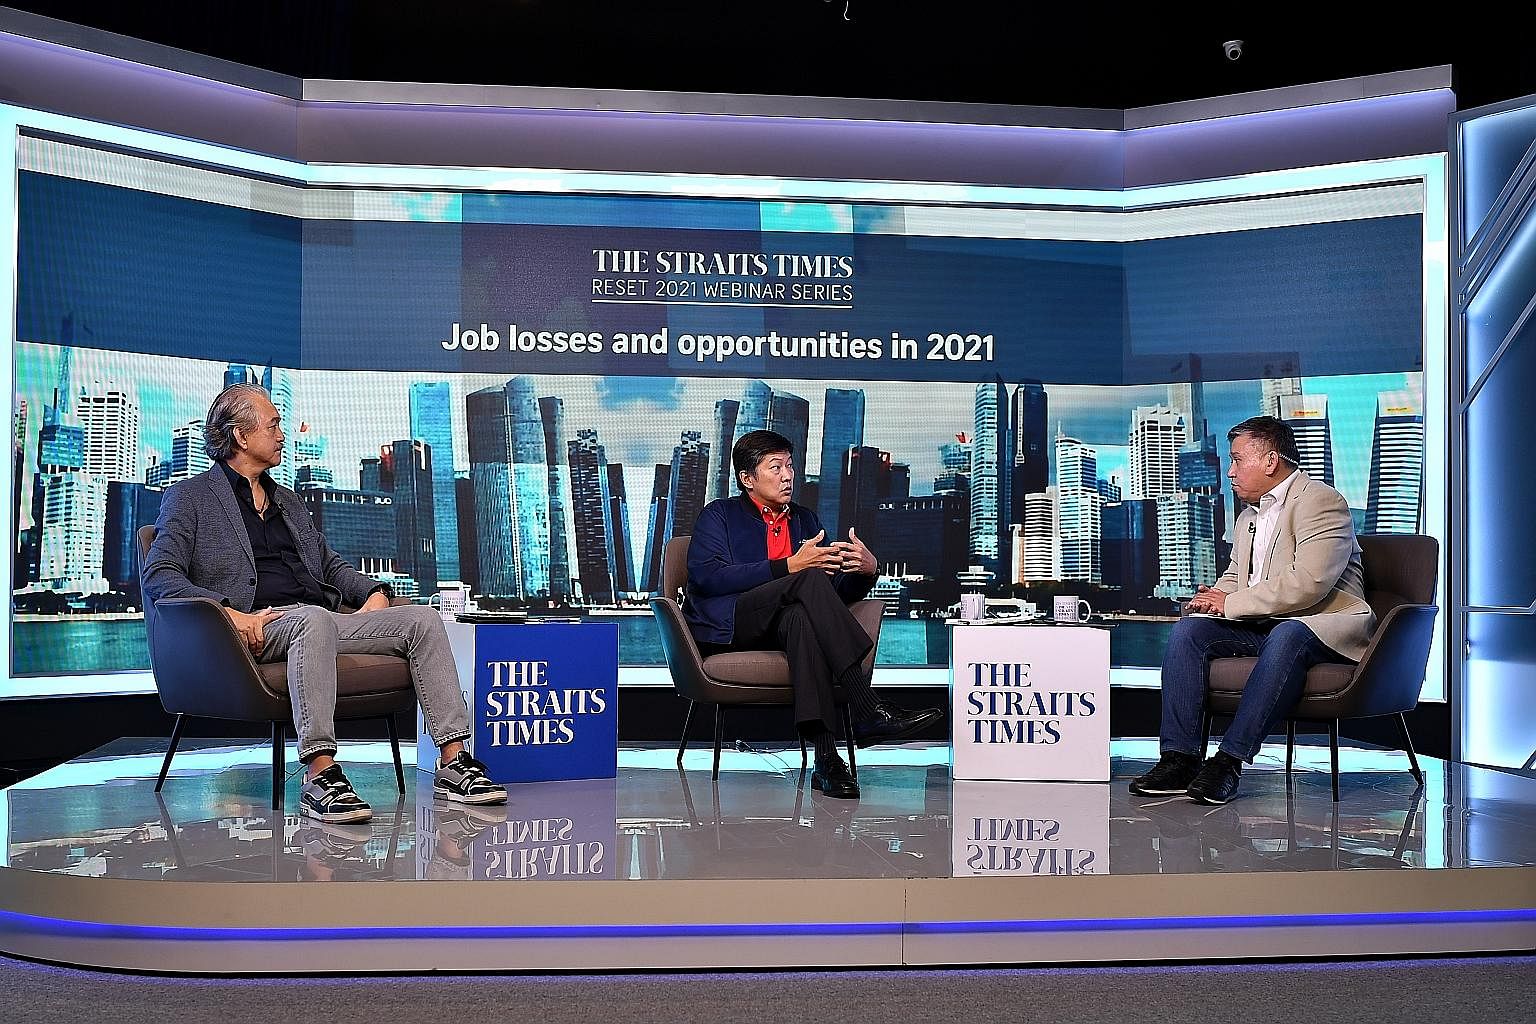 (From left) Singapore National Employers Federation president Robert Yap and labour chief Ng Chee Meng at a Straits Times webinar yesterday on job losses and opportunities in 2021, moderated by Straits Times assistant news editor Toh Yong Chuan. Mr N